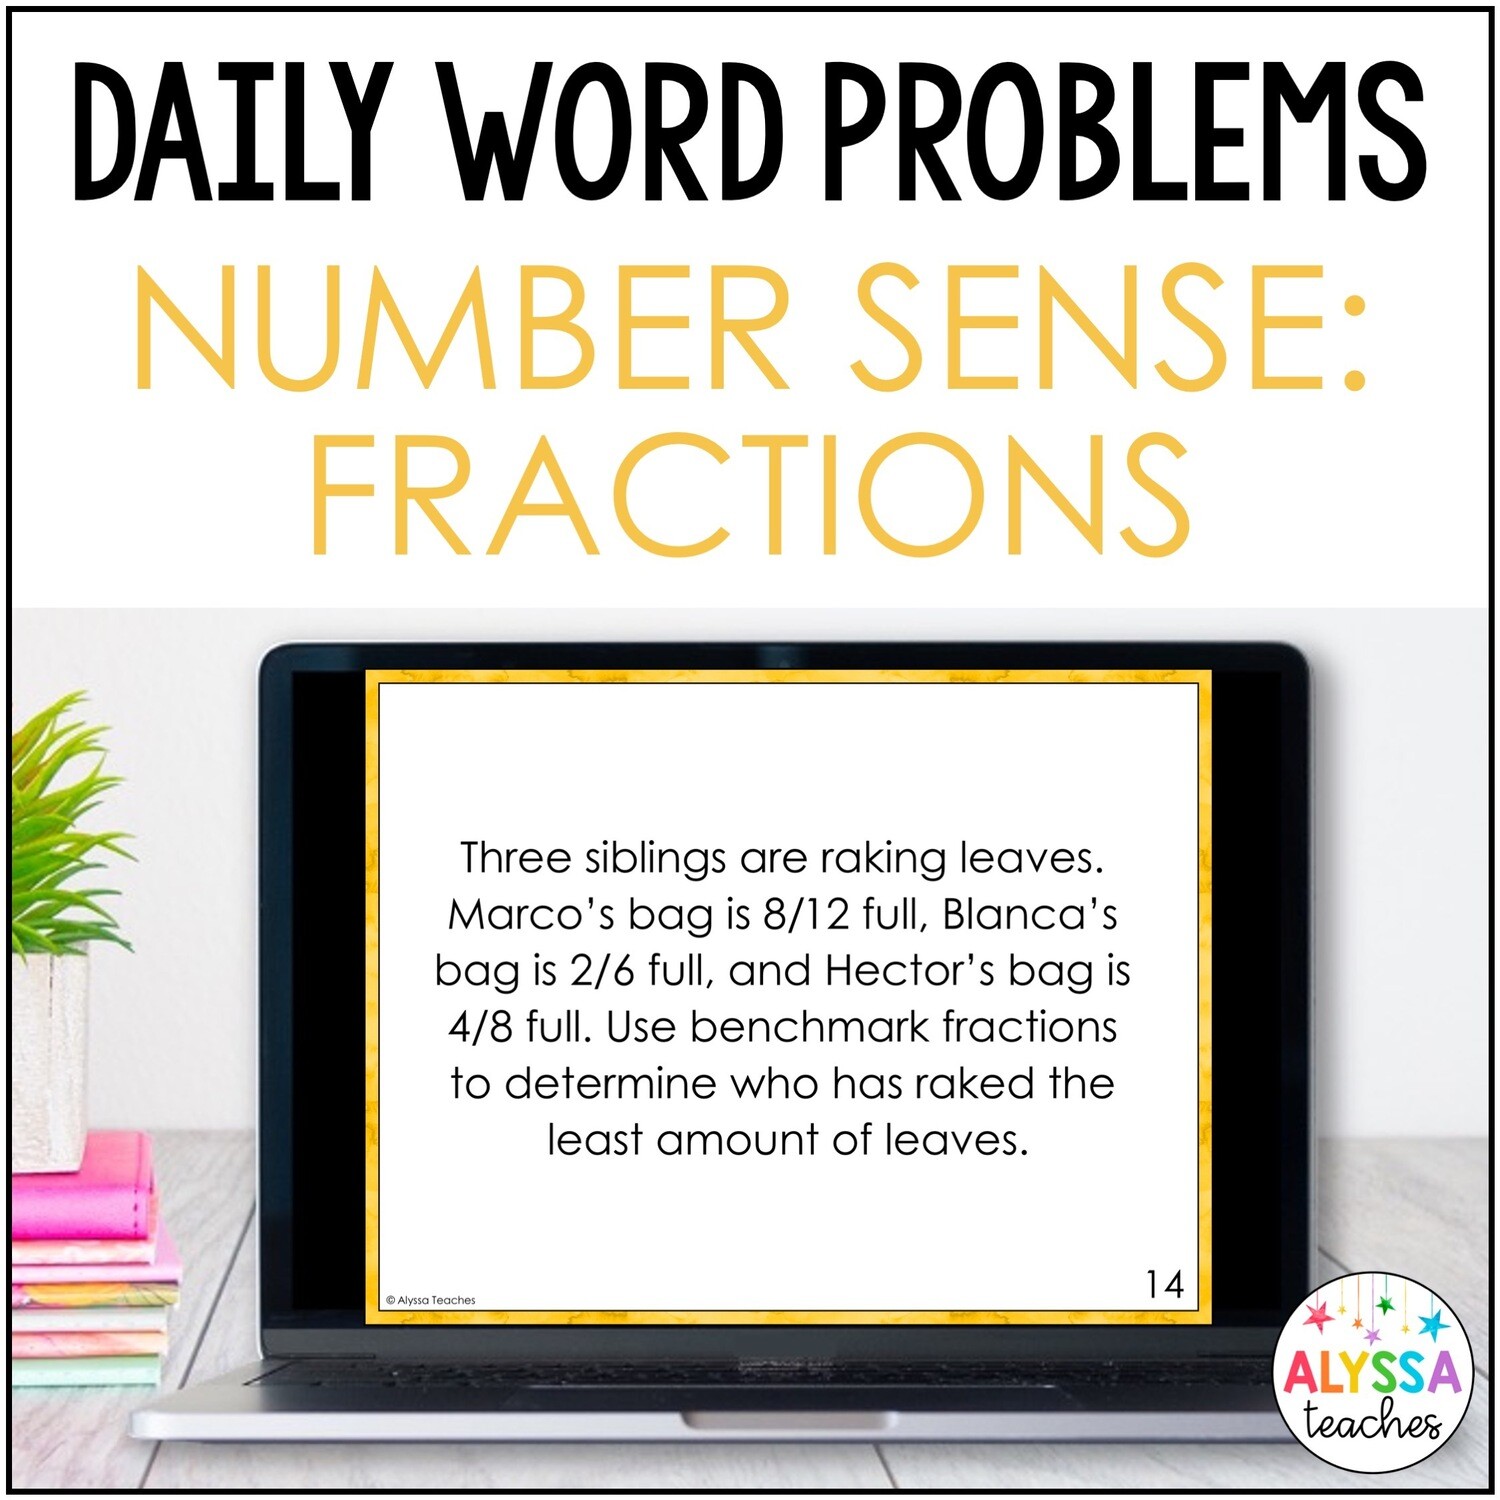 Fractions Word Problems for Daily Math Review